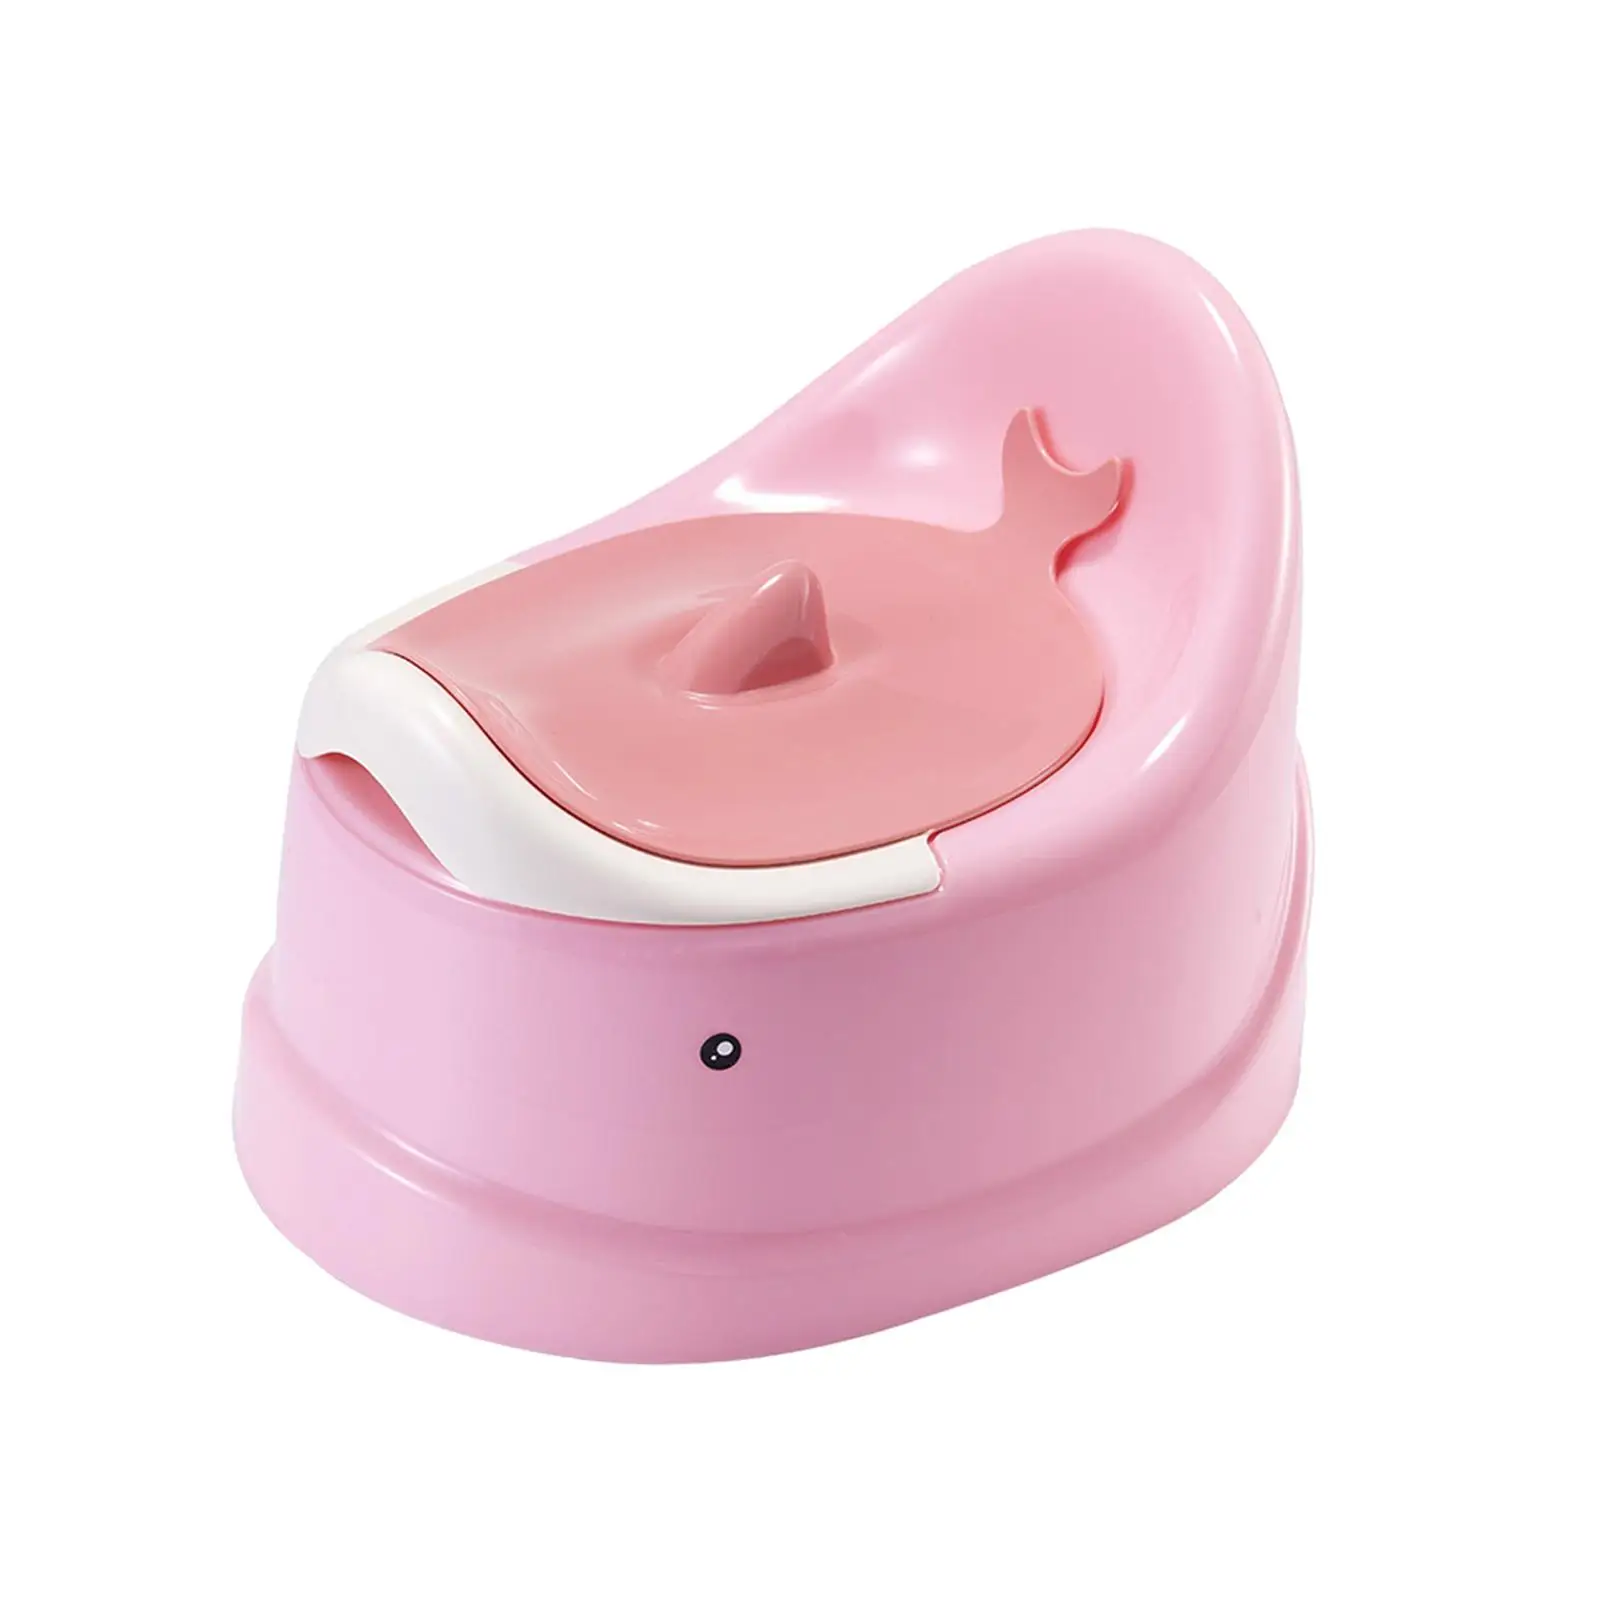 Potty Training Toilet Easy to Clean Nonslip Portable Indoor Adorable for Toddlers for Girls Boys Baby Potty Child Potty Seat